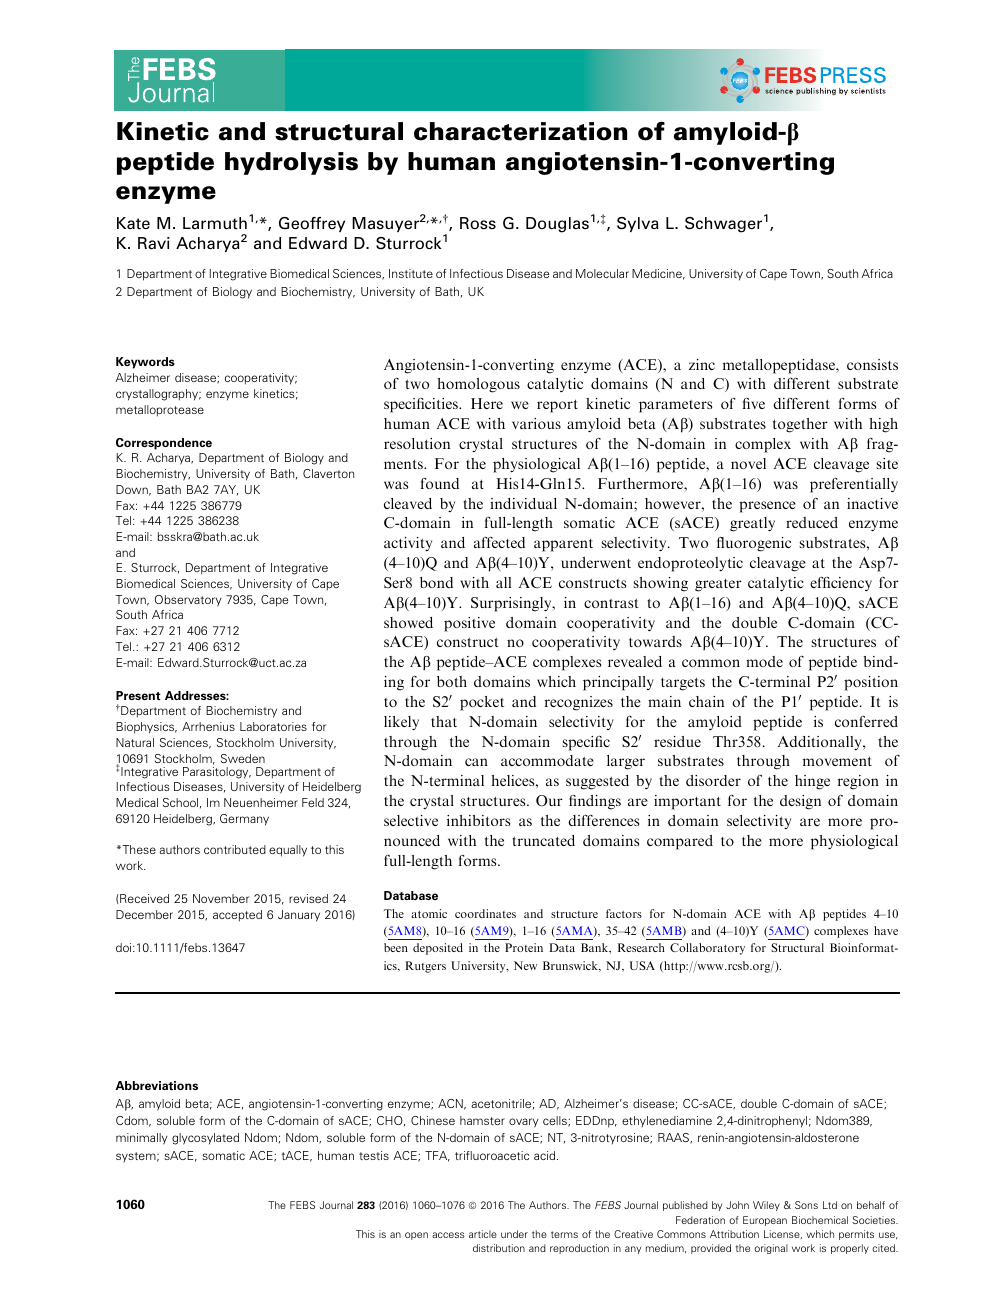 Kinetic And Structural Characterization Of Amyloid B Peptide Hydrolysis By Human Angiotensin 1 Converting Enzyme Topic Of Research Paper In Biological Sciences Download Scholarly Article Pdf And Read For Free On Cyberleninka Open Science